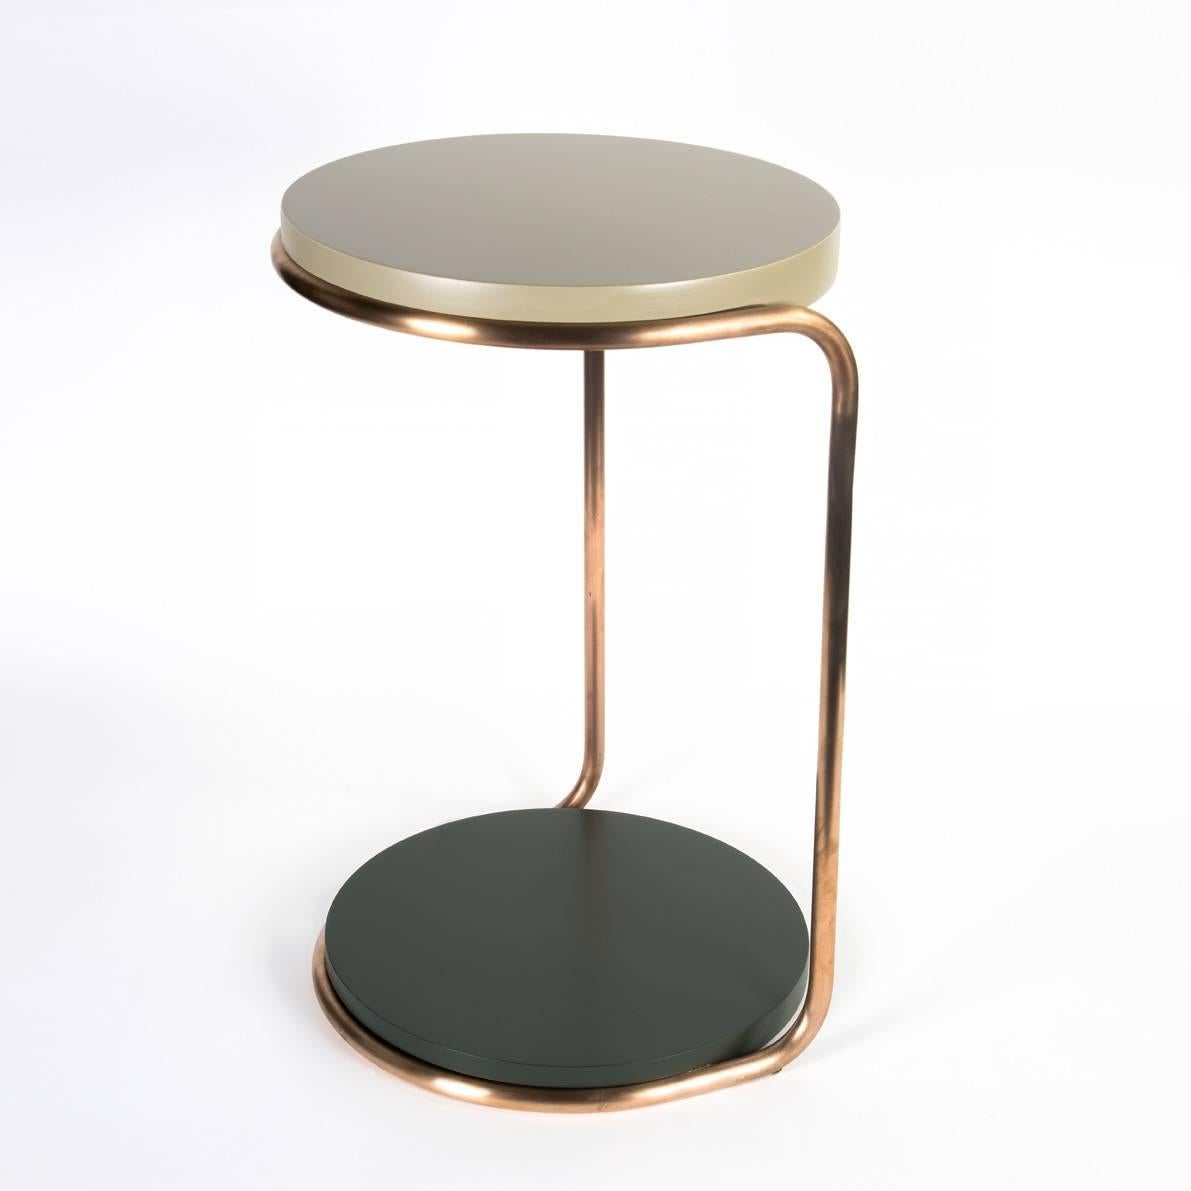 American Mid-Century Modern Style Side Table Bronze Patina Finish and Painted Wood For Sale